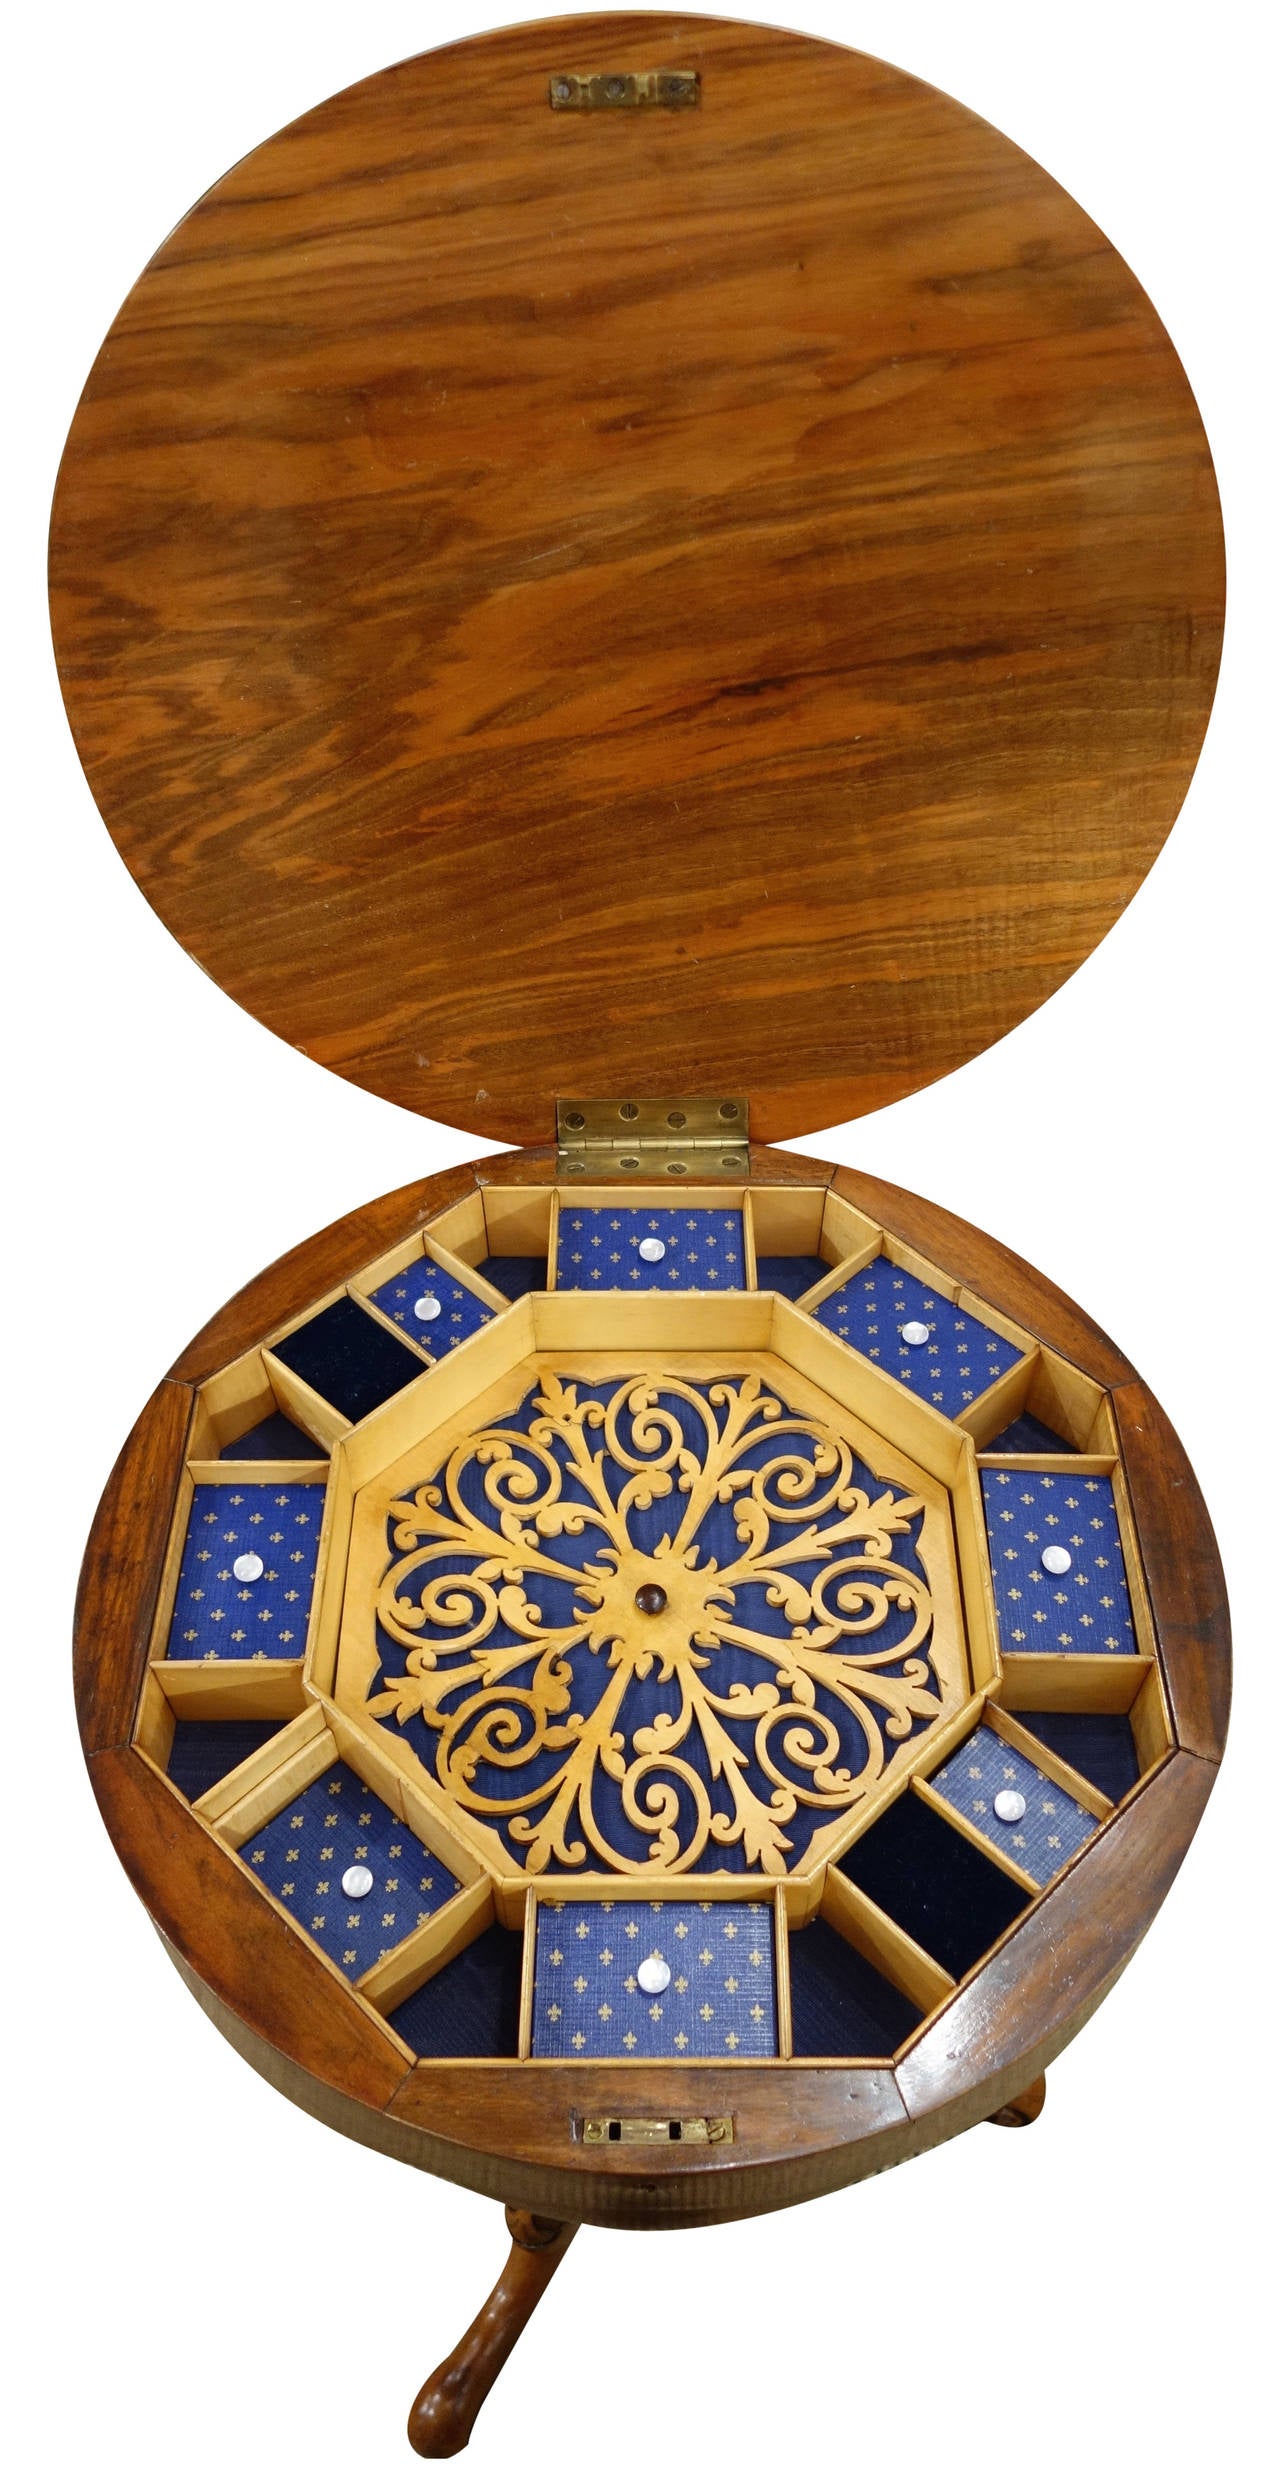 19th century continental table with beautiful fretwork on the interior.